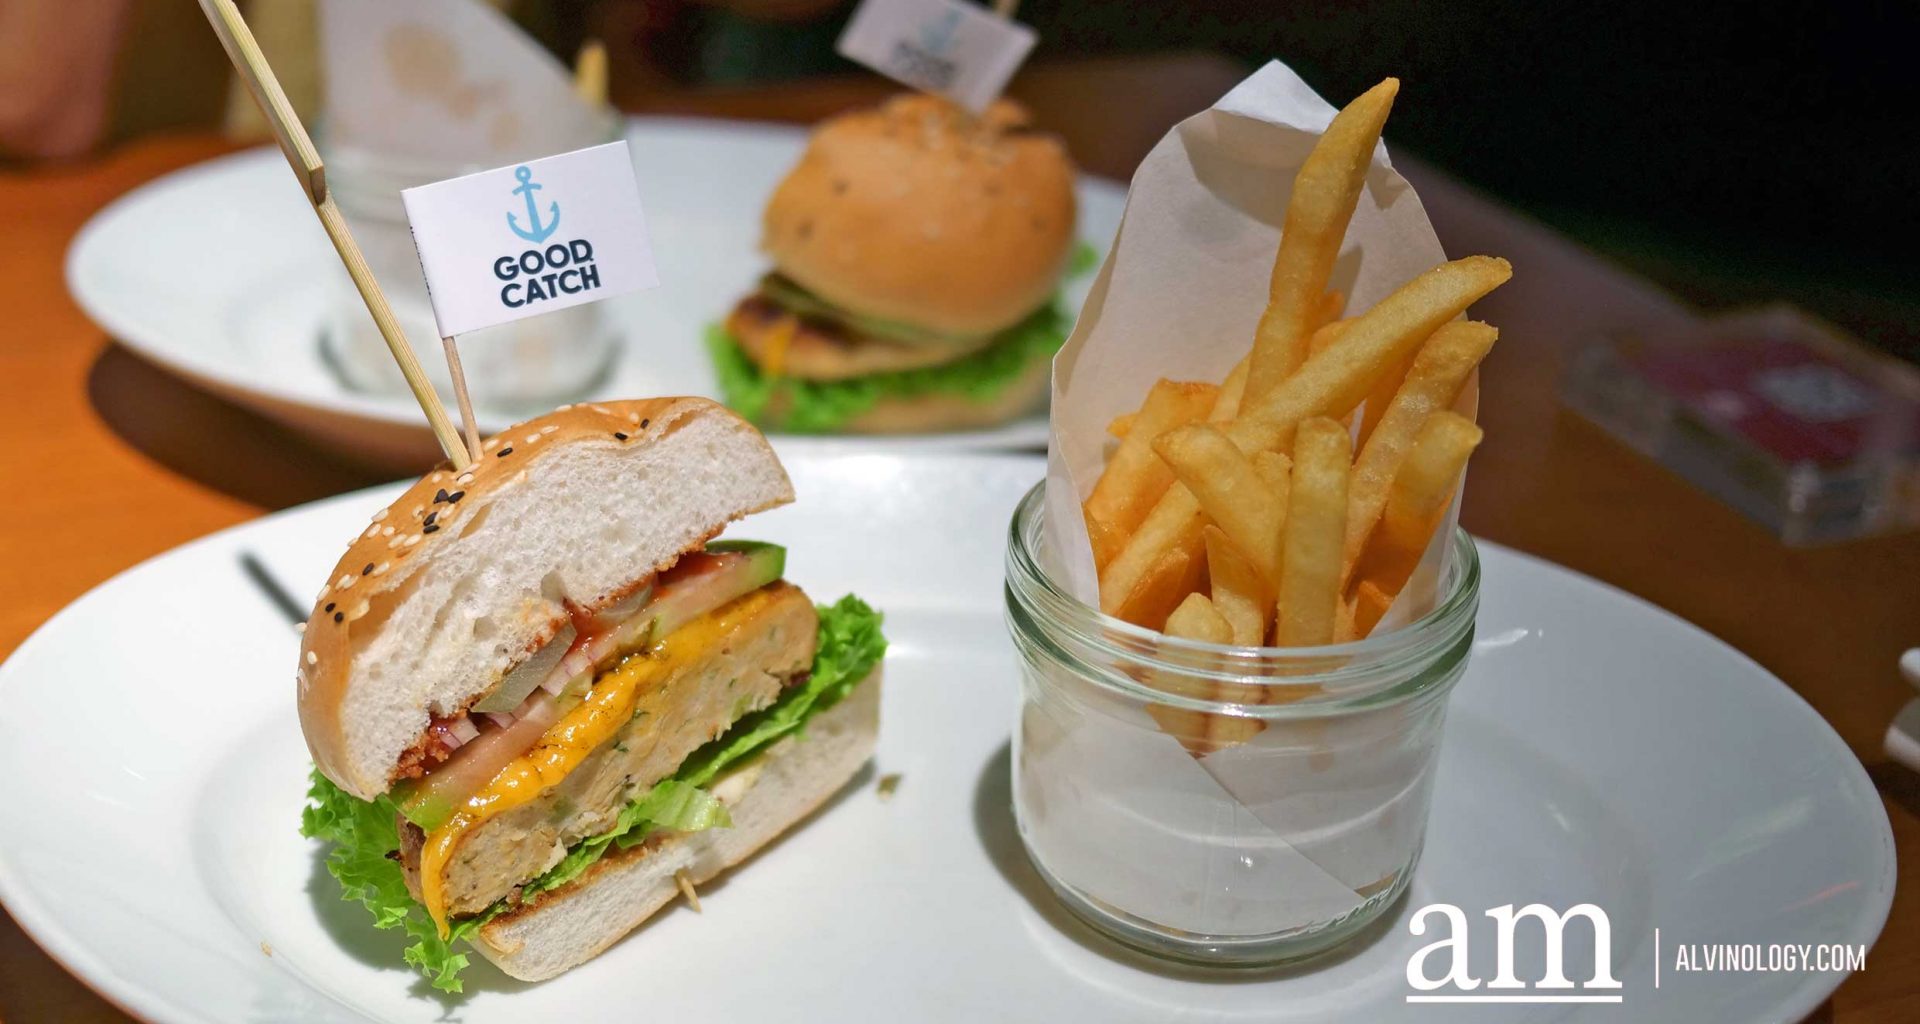 [Review] Good Catch Sustainable Seafood Launches in Singapore - Available at Grand Hyatt Singapore and Privé - Alvinology